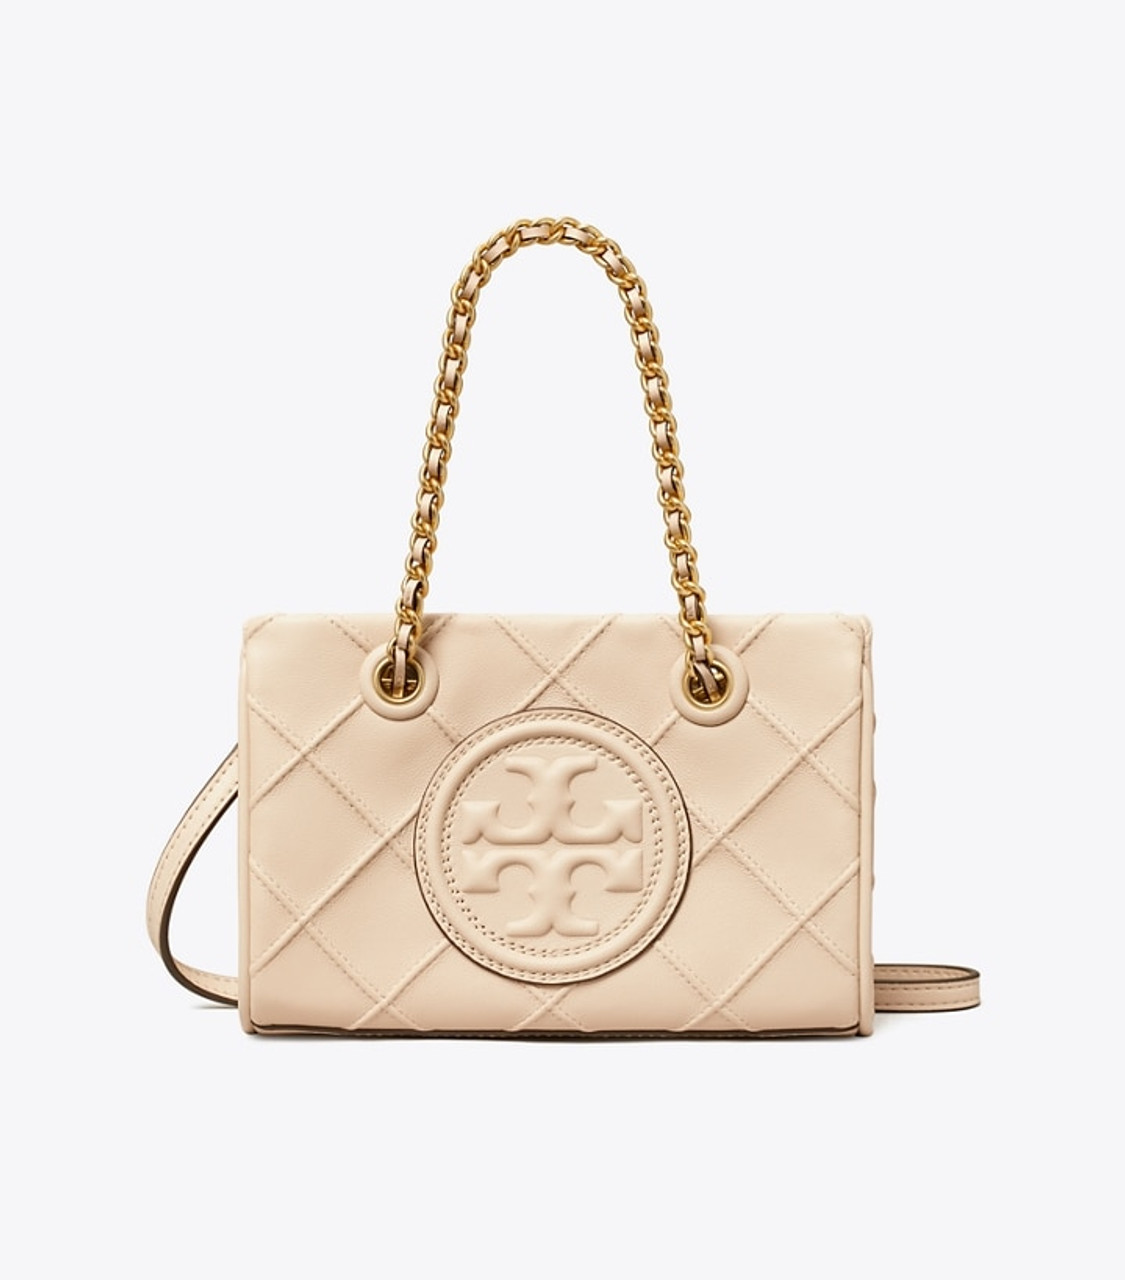 Totes bags Tory Burch - Fleming golden chain black leather tote